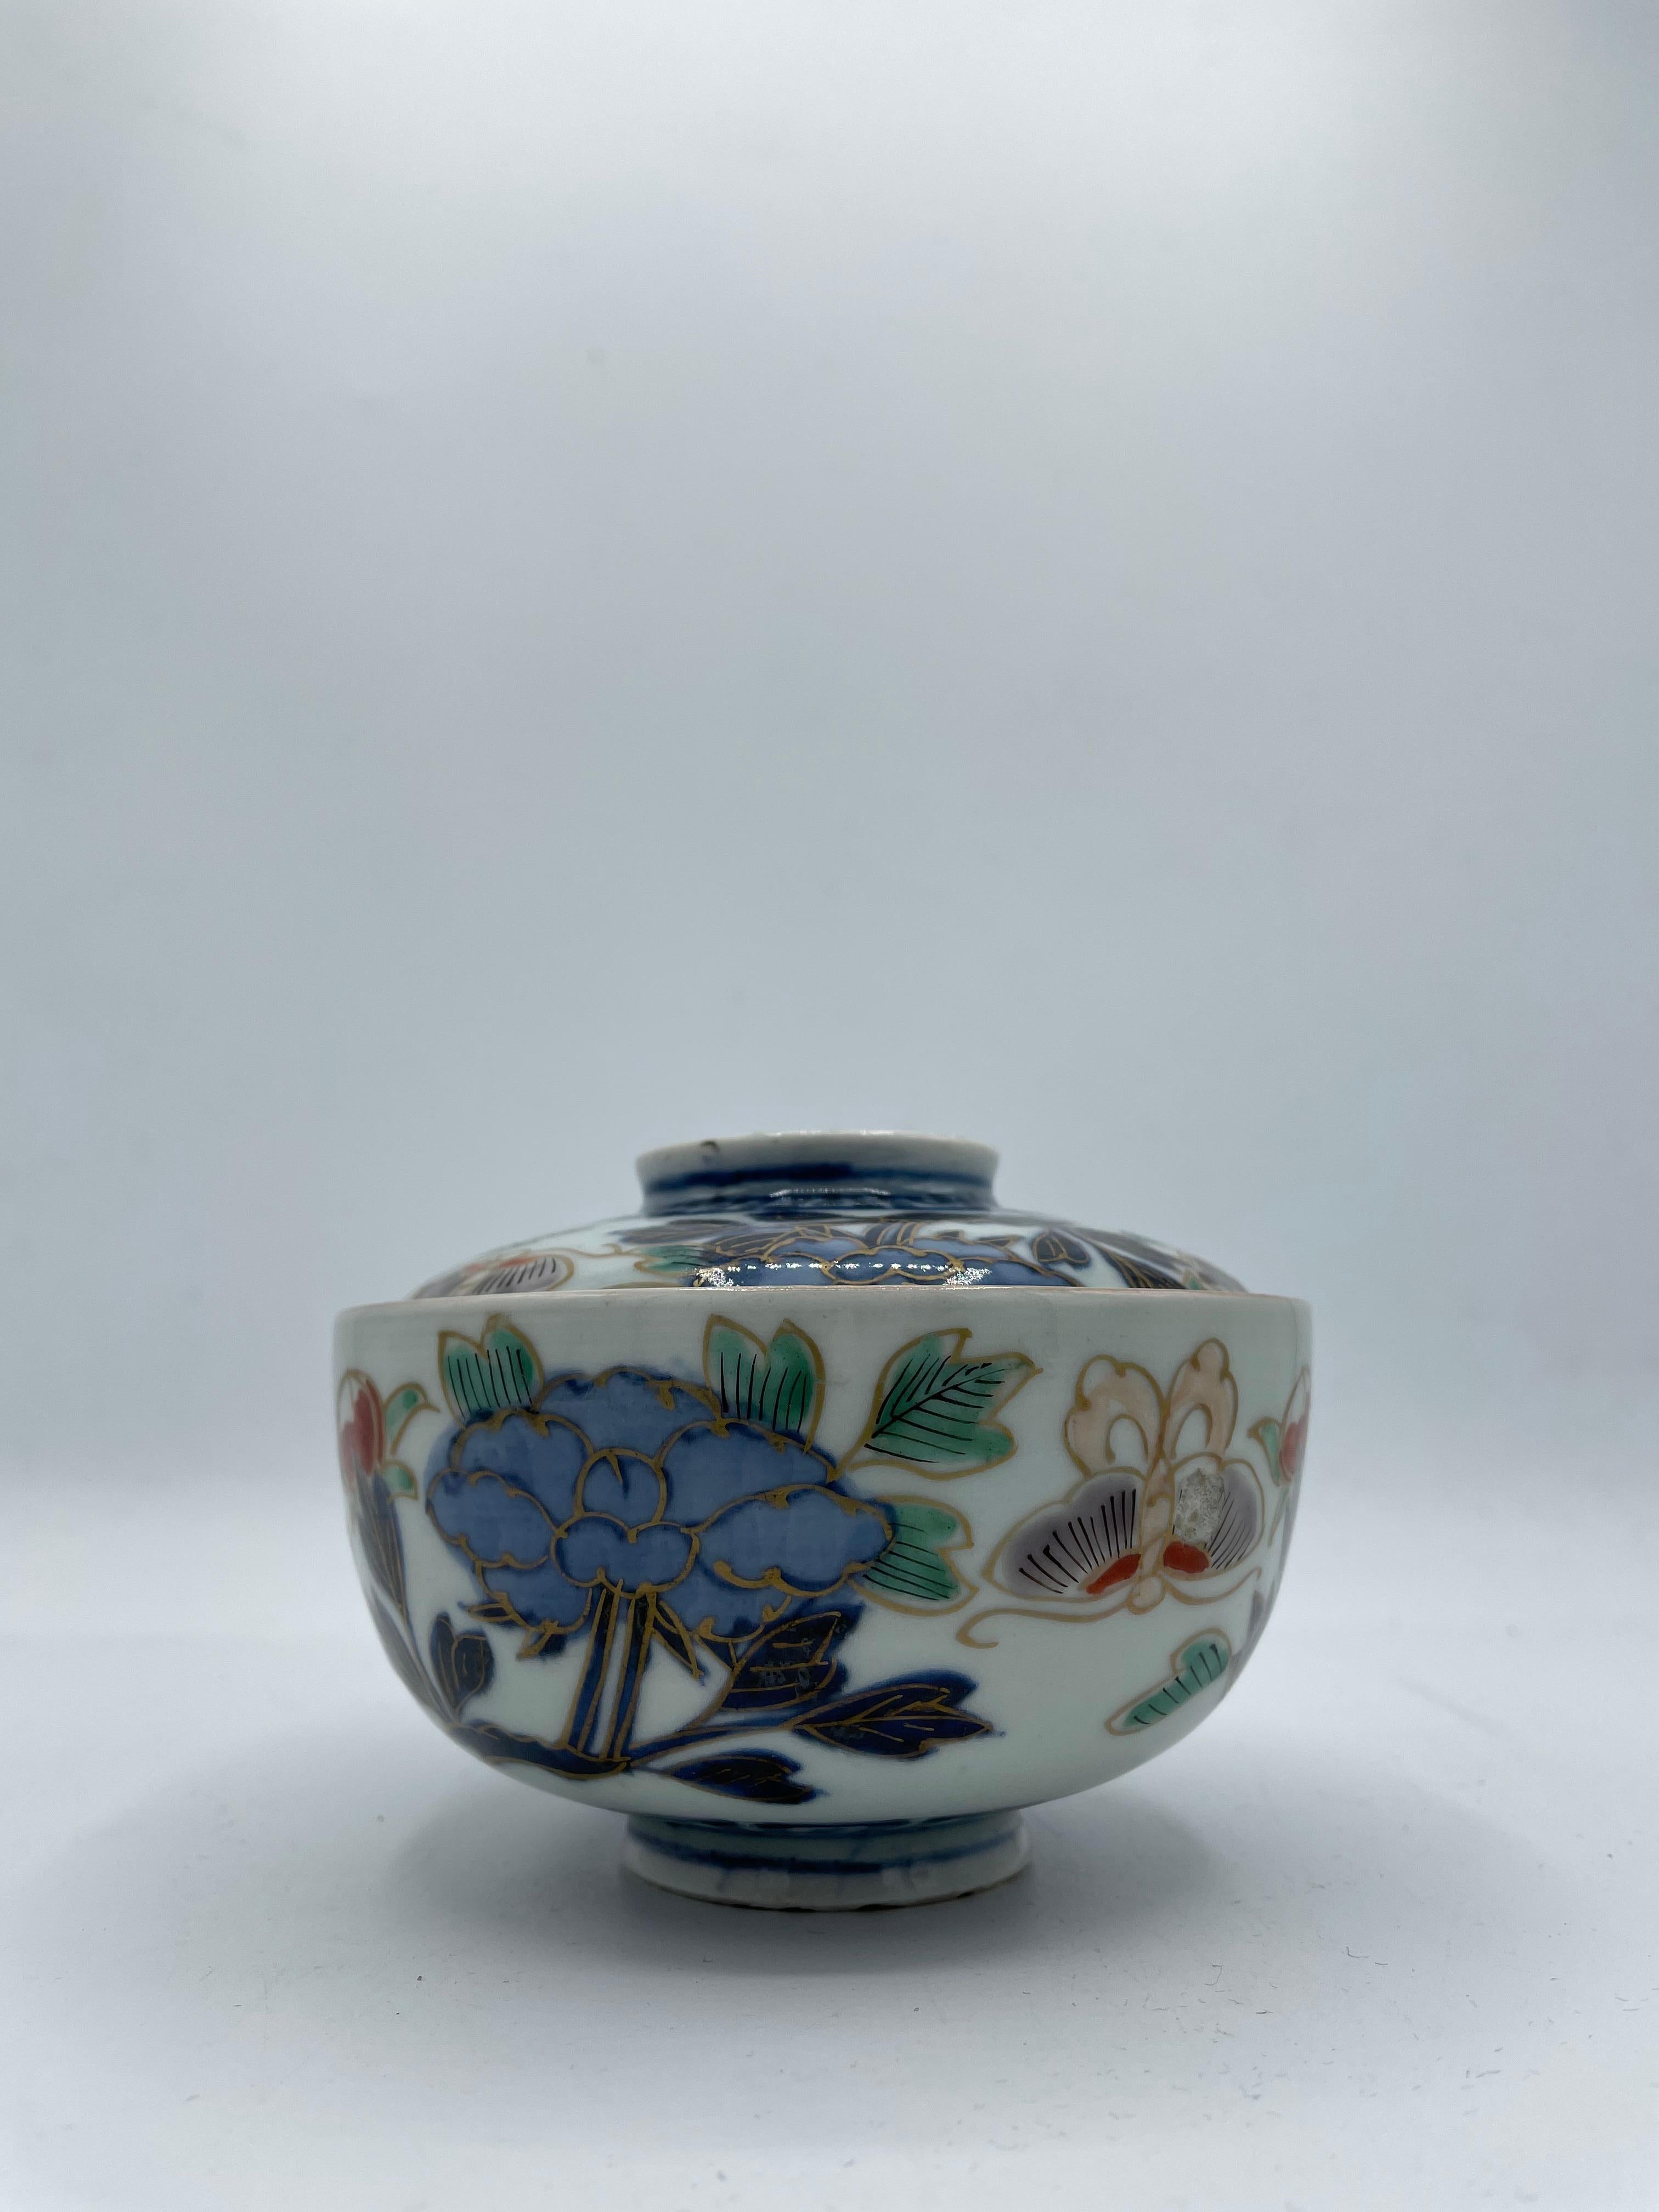 This is a Japanese rice bowl made in Saga prefecture, port of imari. 
It is made with Imari style ( Imari ware) and made around 1920s in Taisho era.
Taisho era was from 1912 to 1926. 
Imari ware is decorated in underglaze blue, with red, gold,